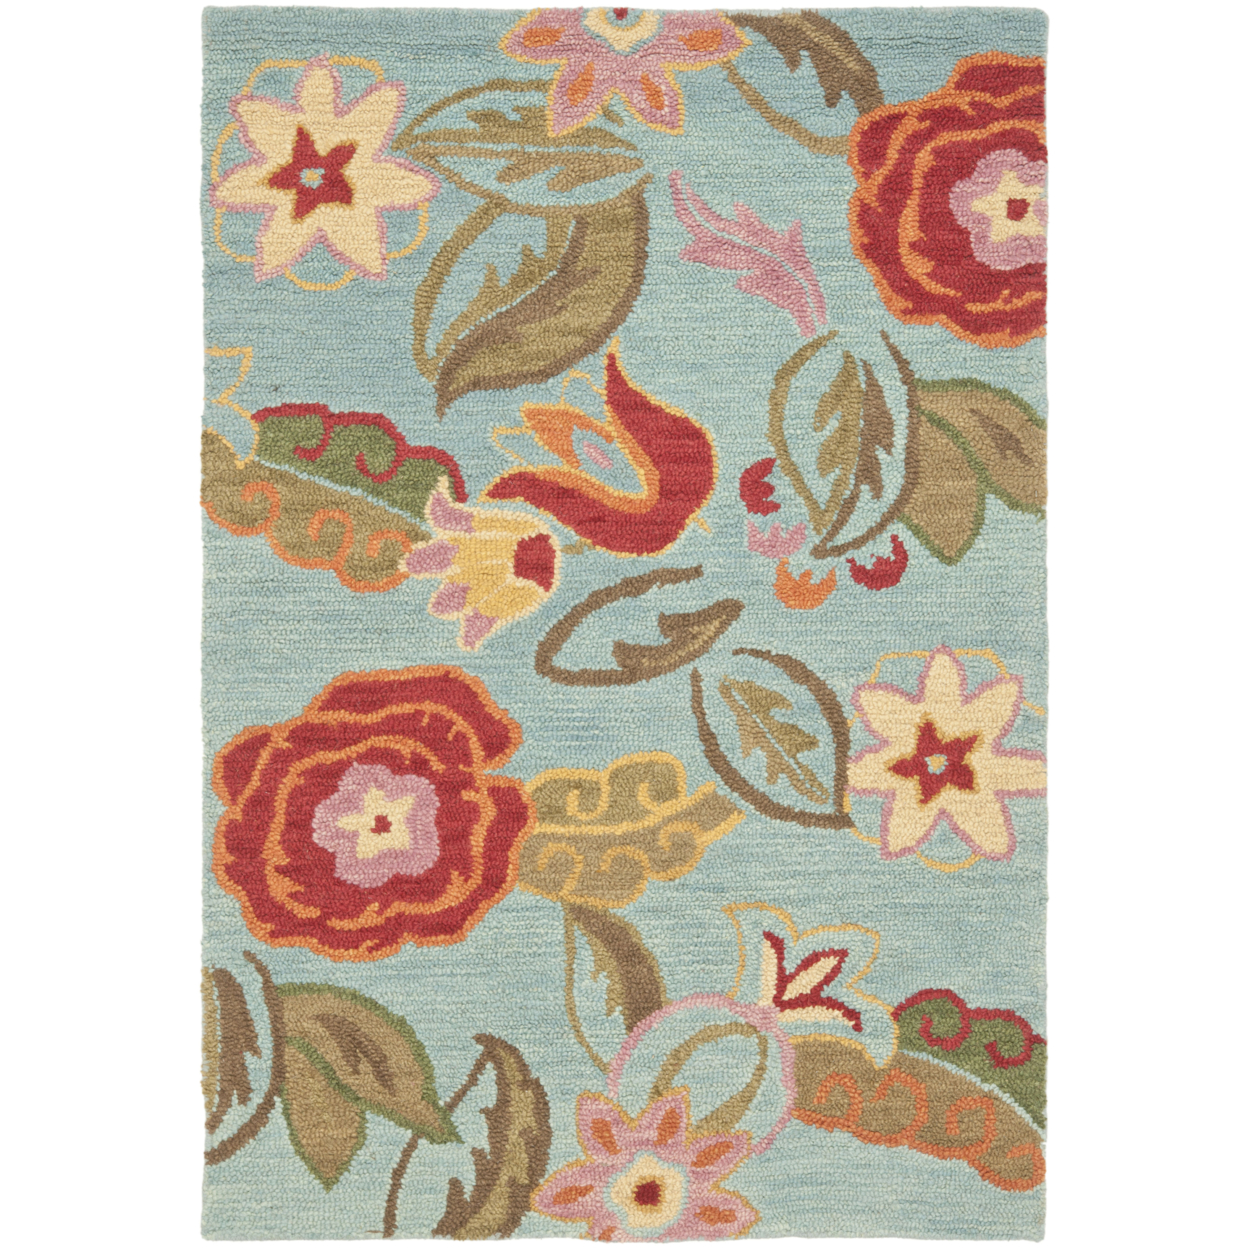 SAFAVIEH Blossom BLM675A Hand-hooked Blue / Multi Rug - 4' X 6'